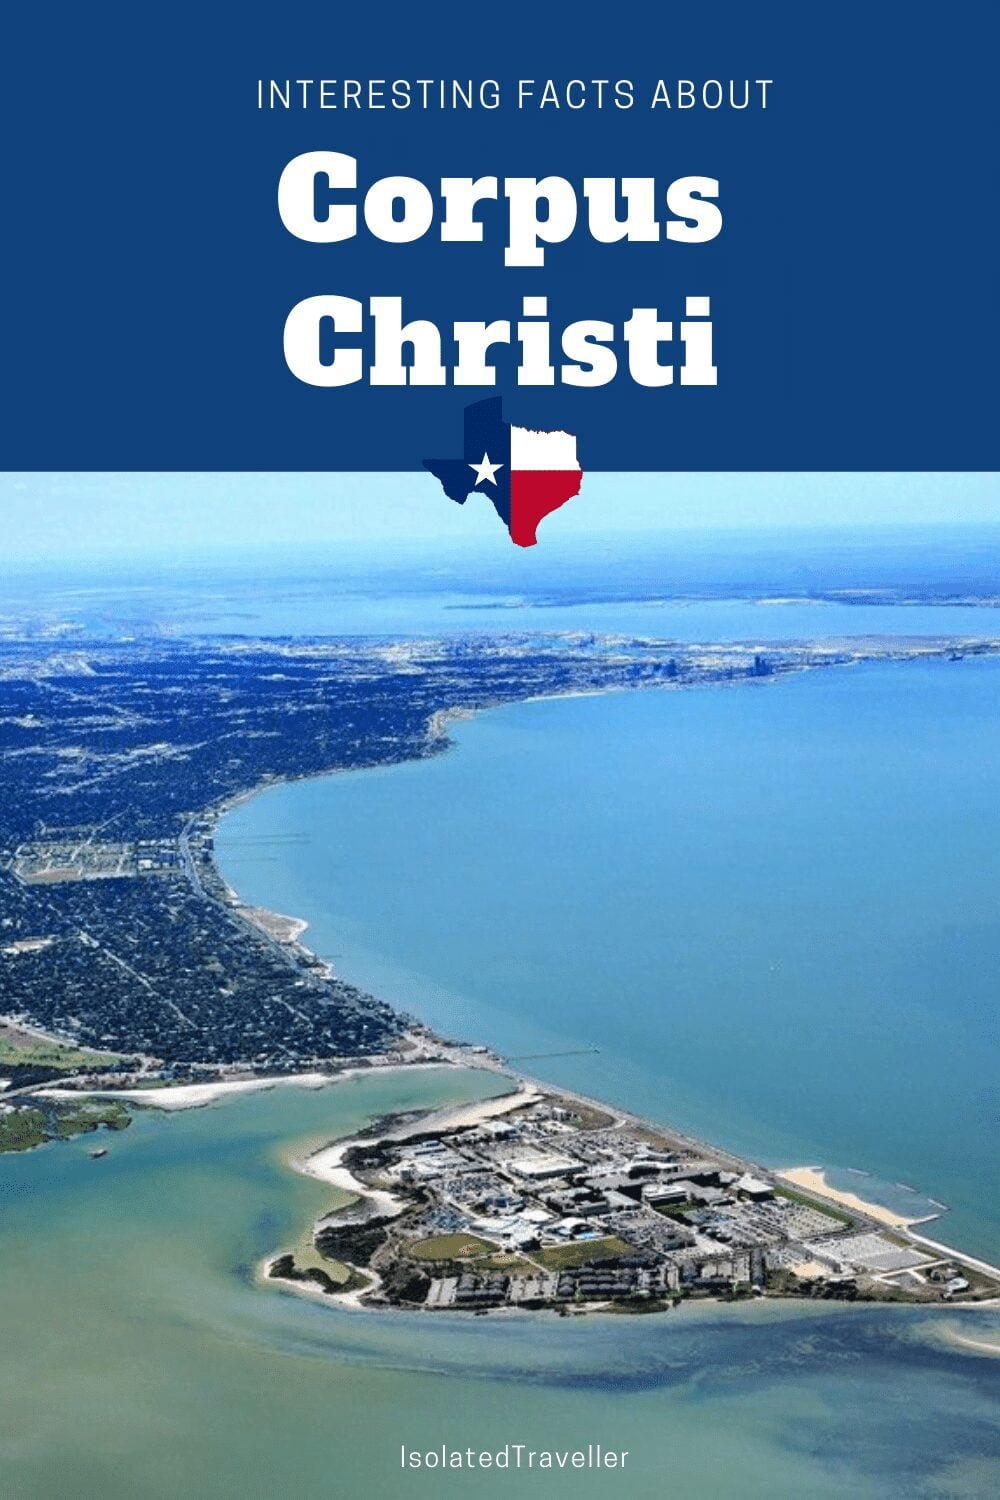 Facts About Corpus Christi, Texas